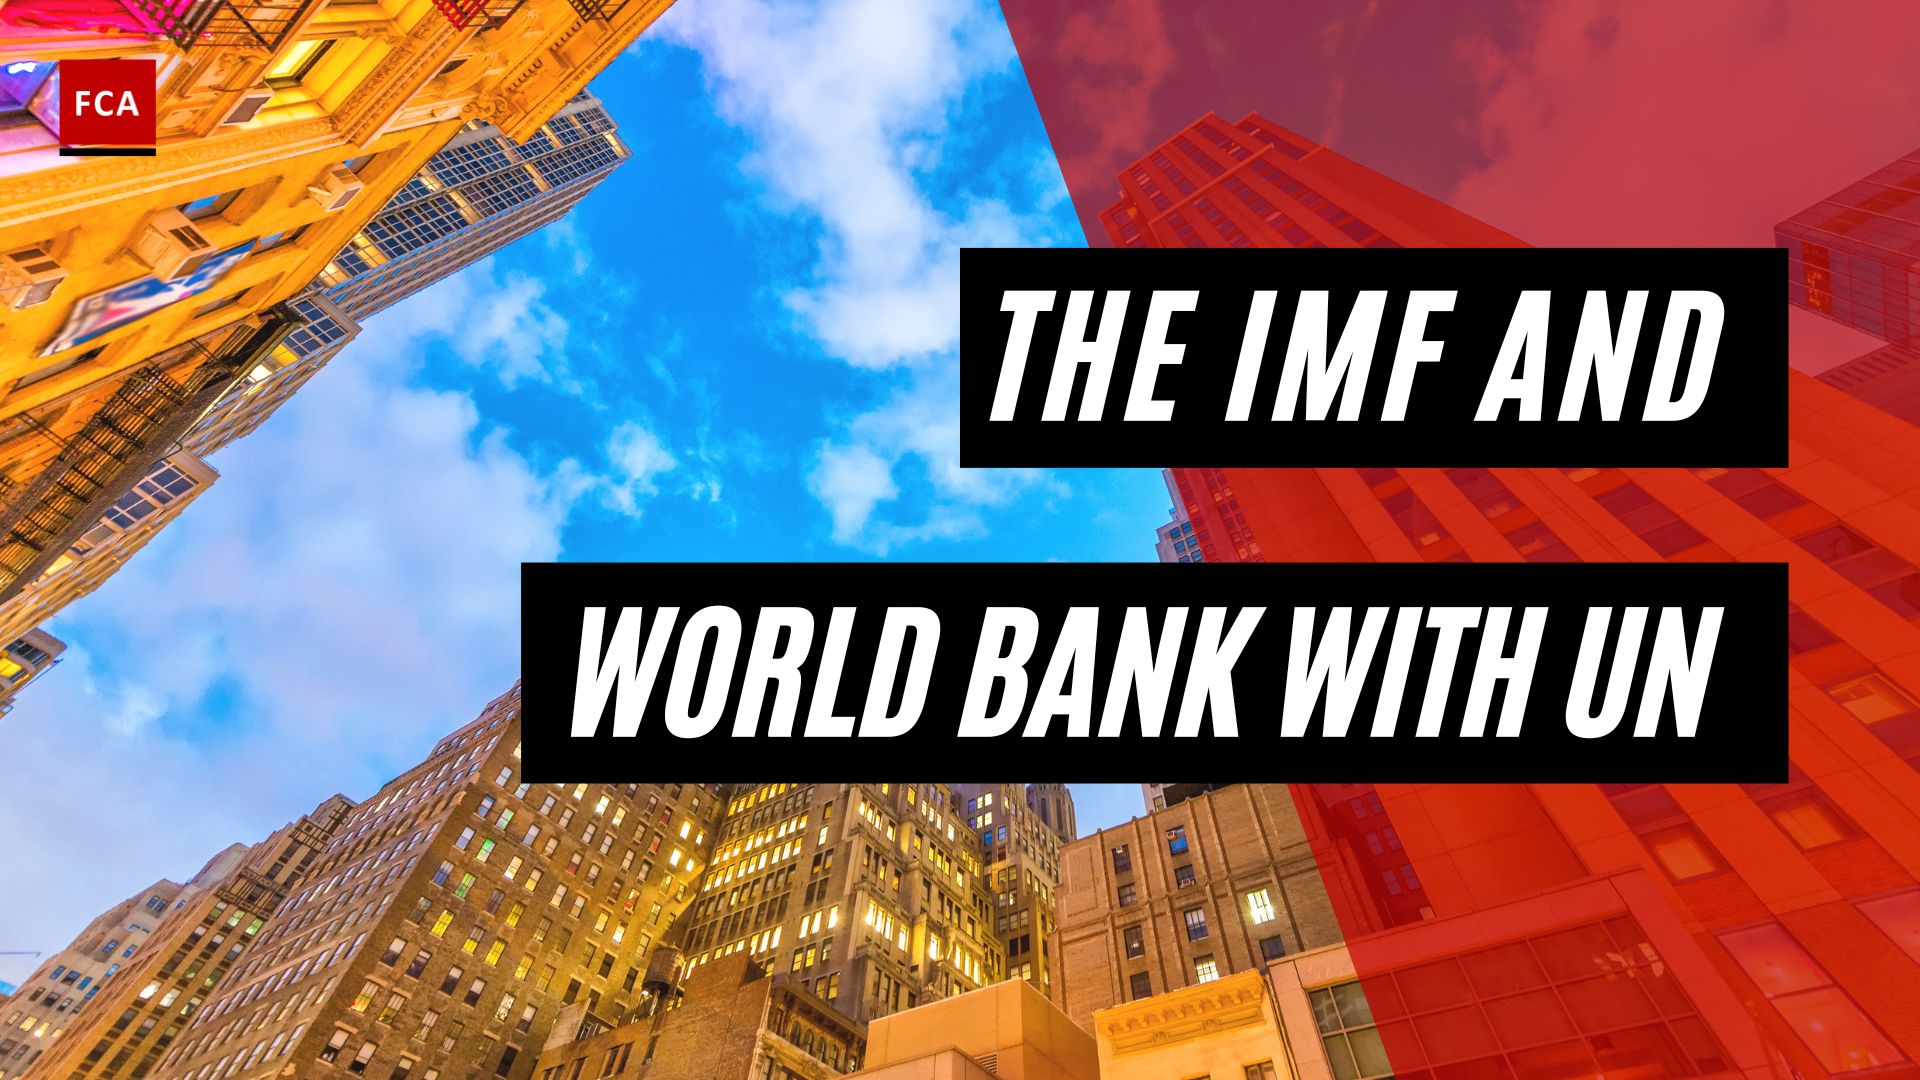 The Imf And World Bank With Un